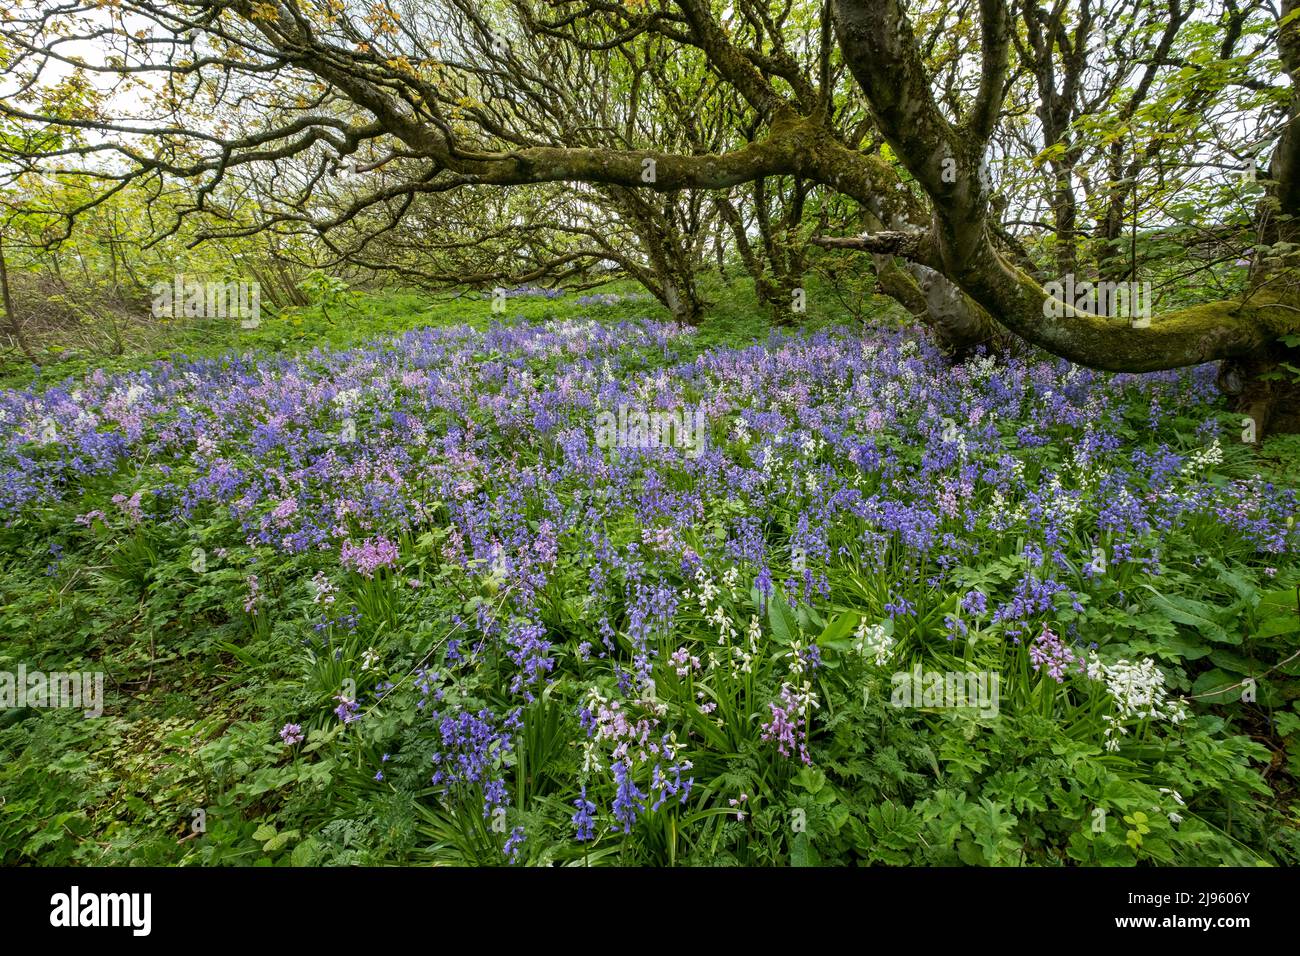 A carpet of Bluebells ( Hyacinthoides non-scripta) cover the ground in a small woodland at Gyre, Orkney Islands, Scotland. Stock Photo